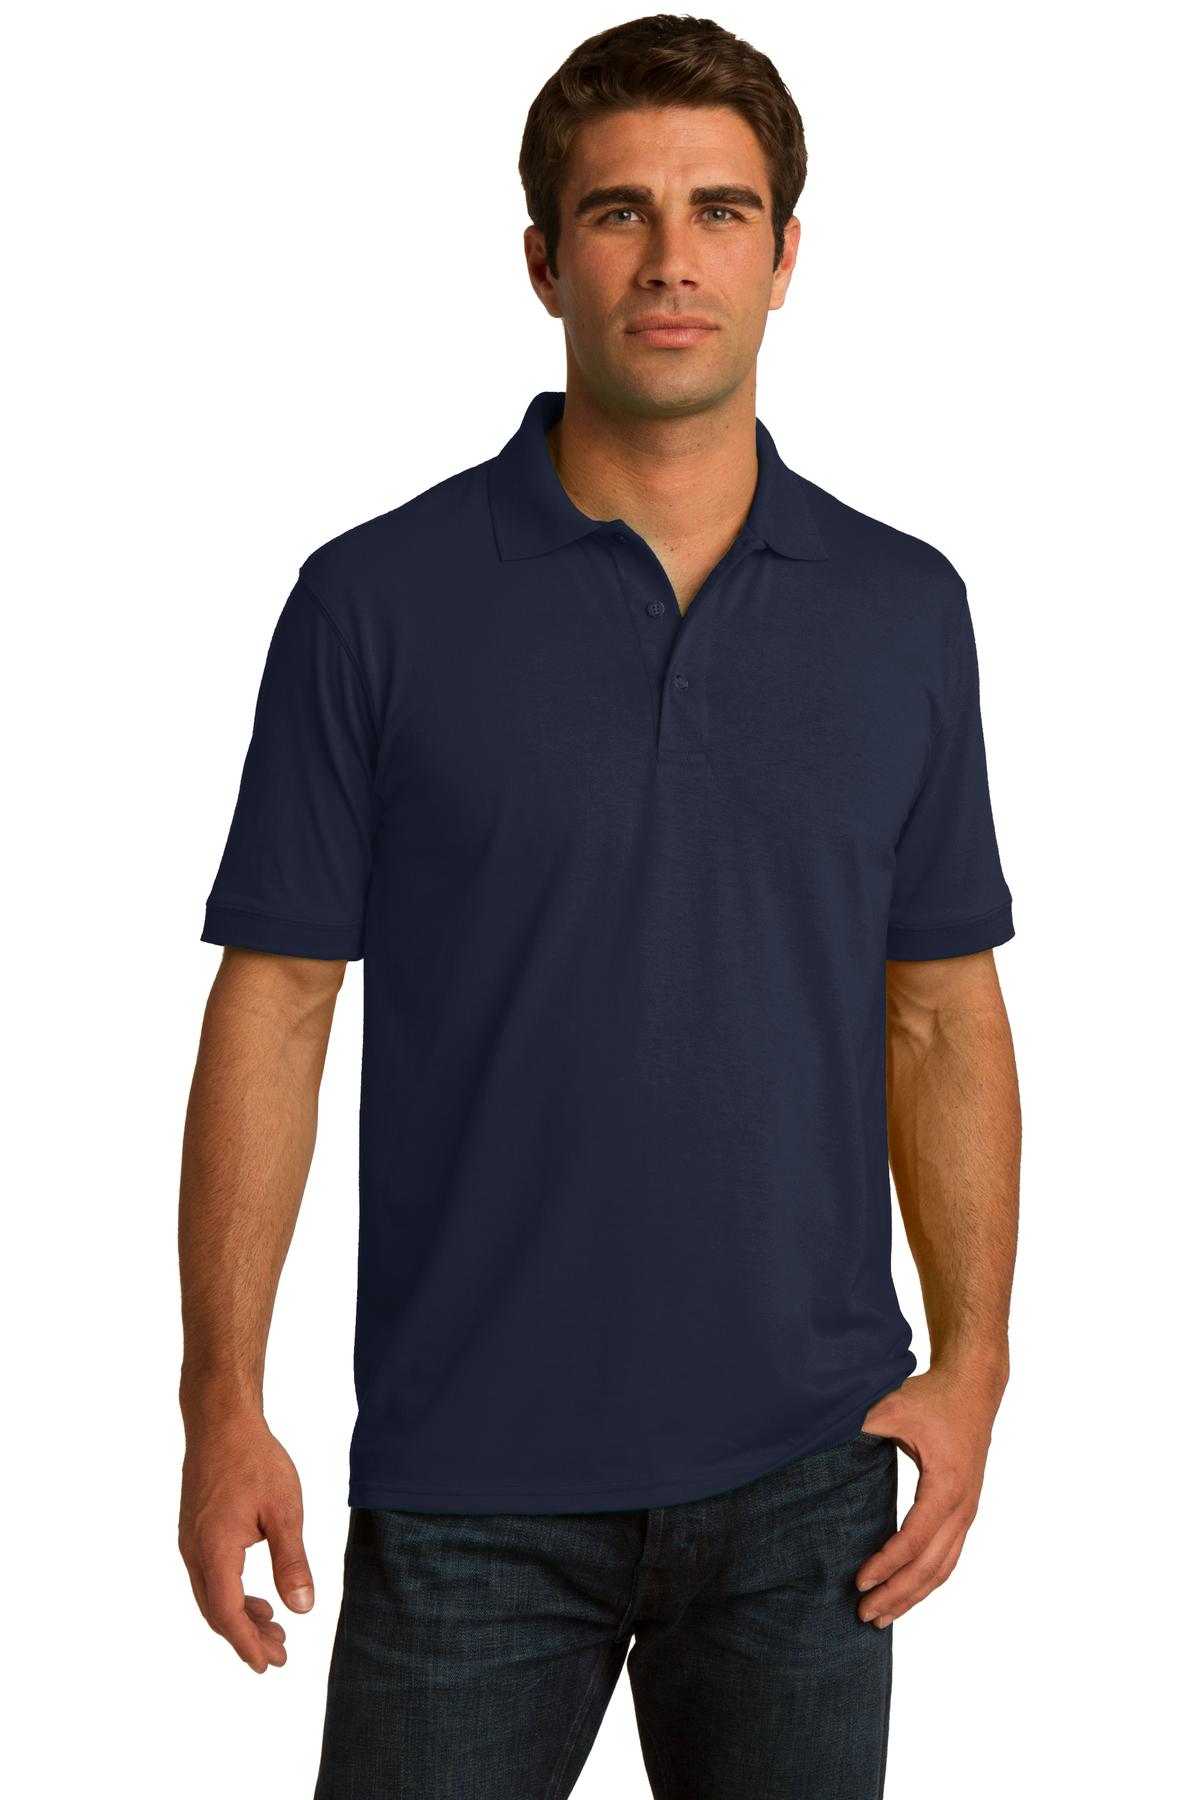 Port & Company Tall Core Blend Jersey Knit Polo - image 1 of 3